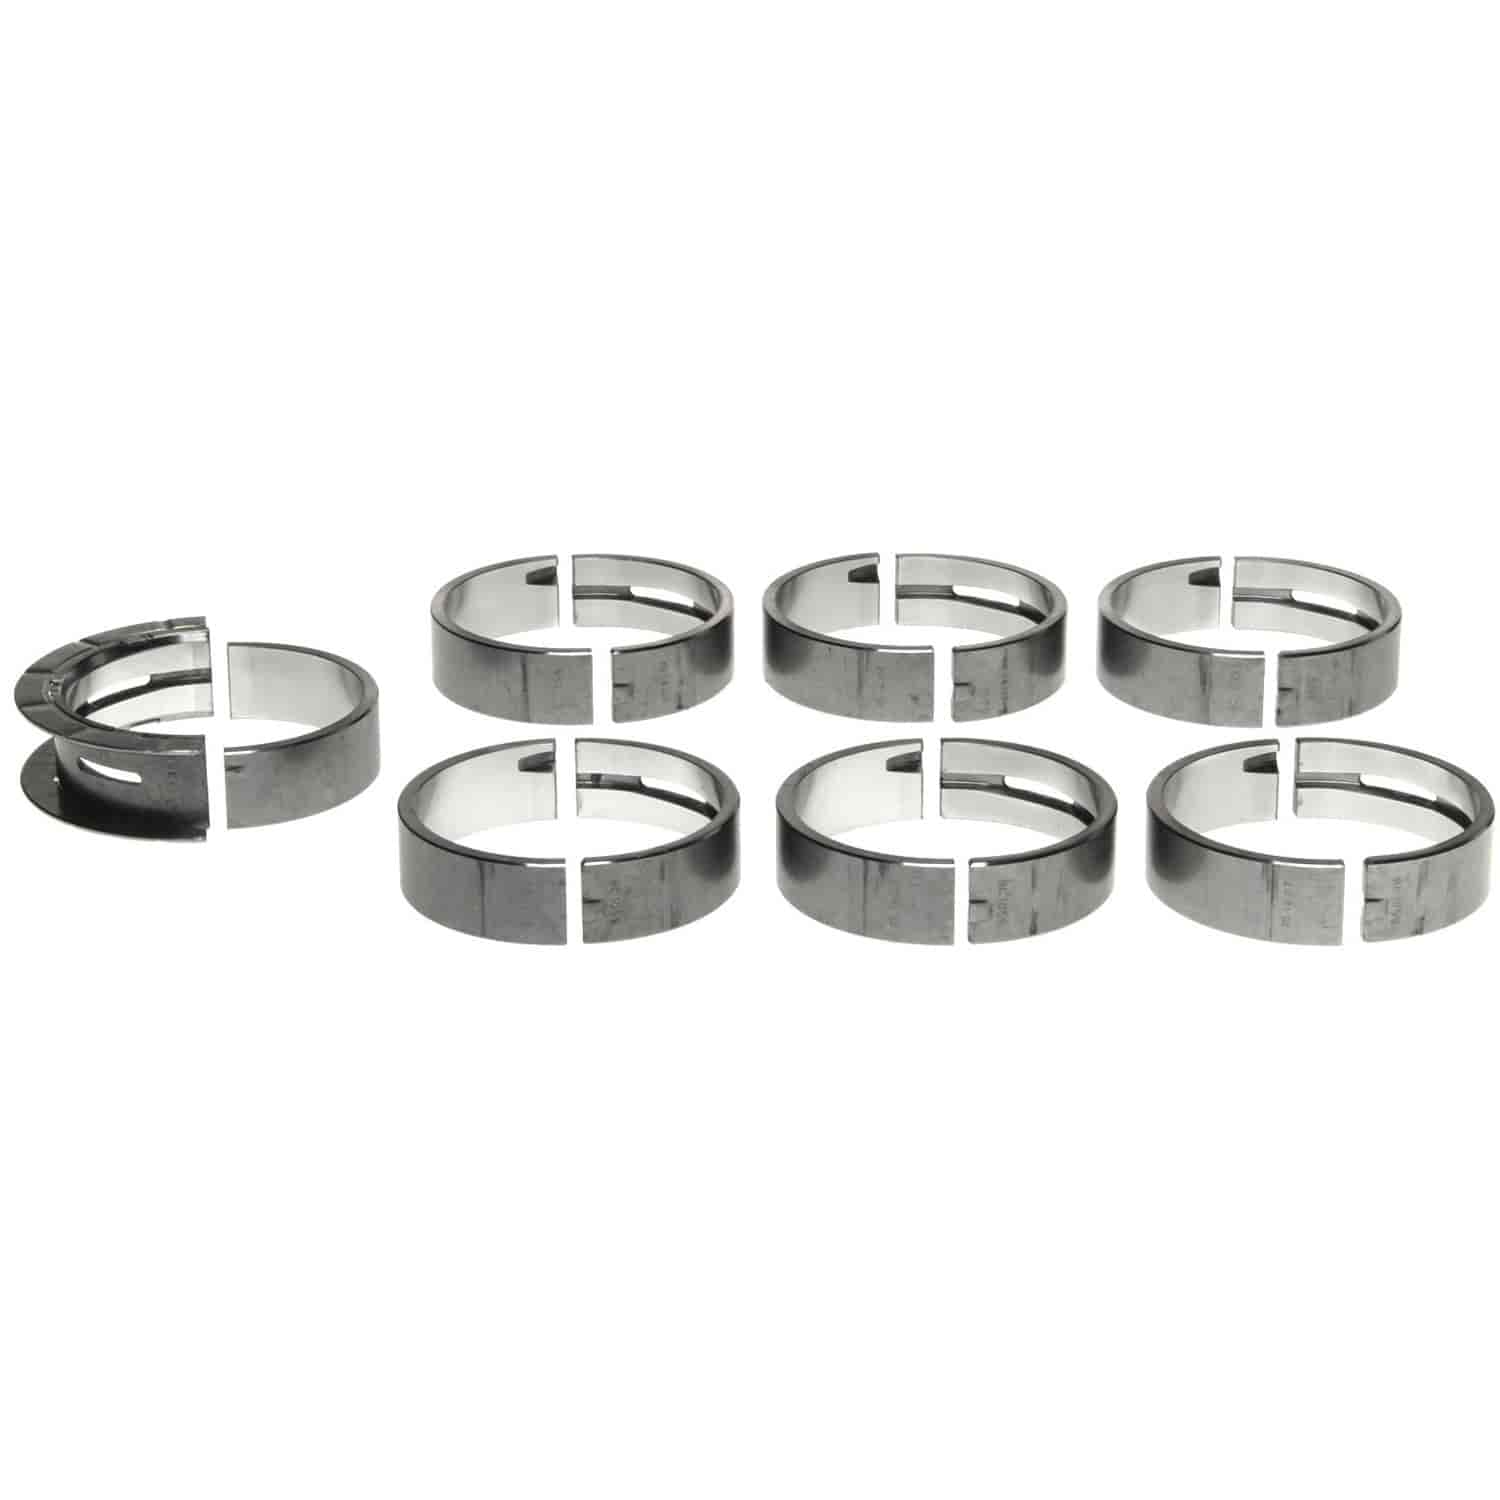 Main Bearing Set Chevy 2002-2009 L6 4.2L with